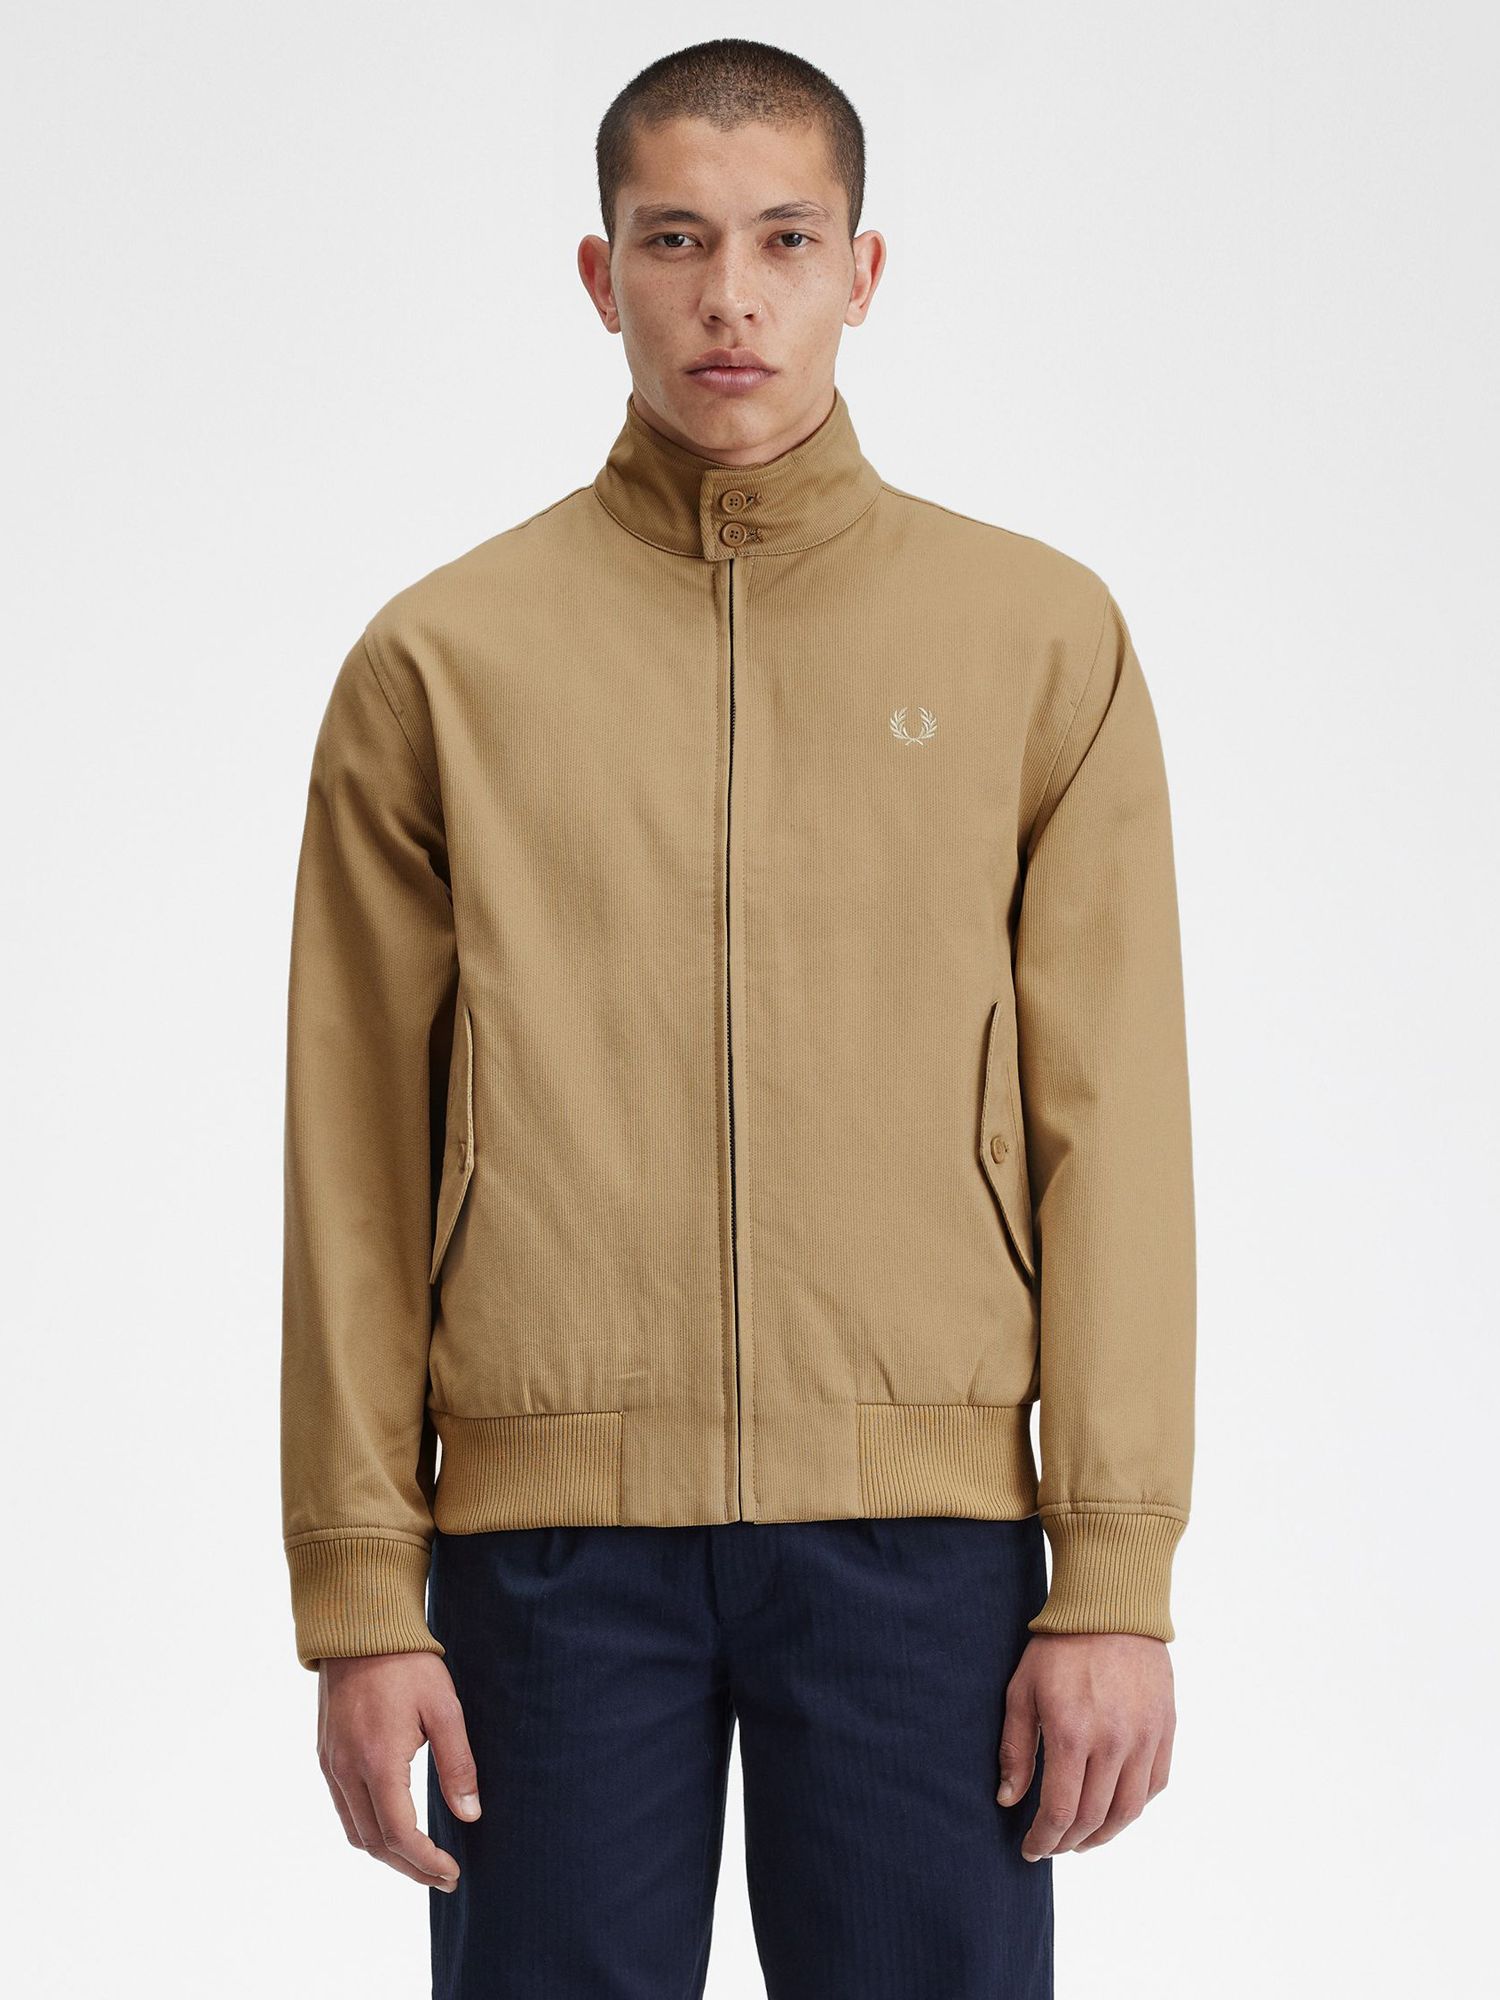 Fred Perry Cord Harrington Jacket, Brown, S